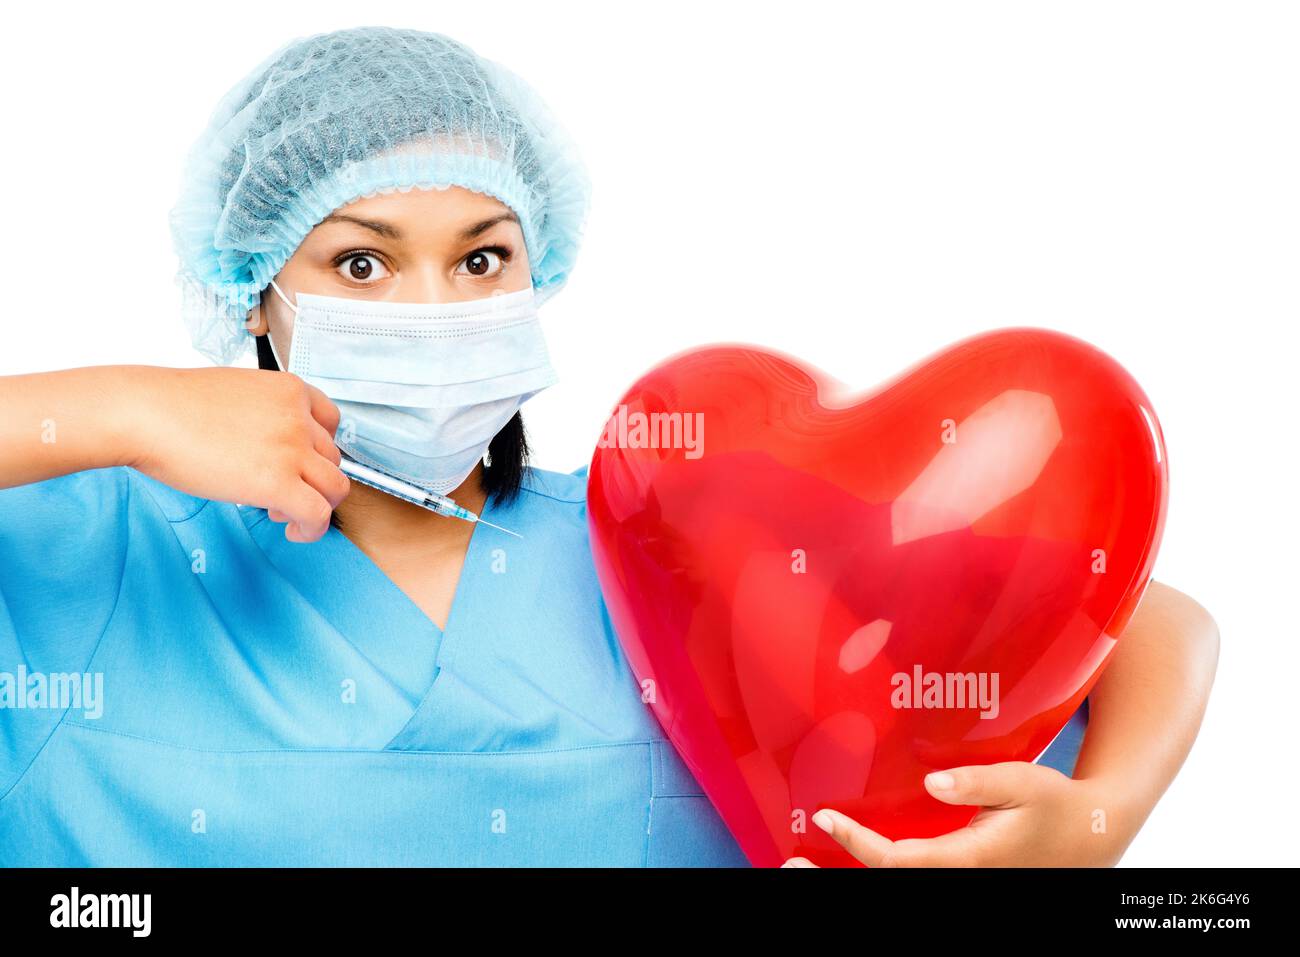 Helping your heart grow twice its size. a female nurse holding a heart shaped balloon ready to inject it against a studio background. Stock Photo